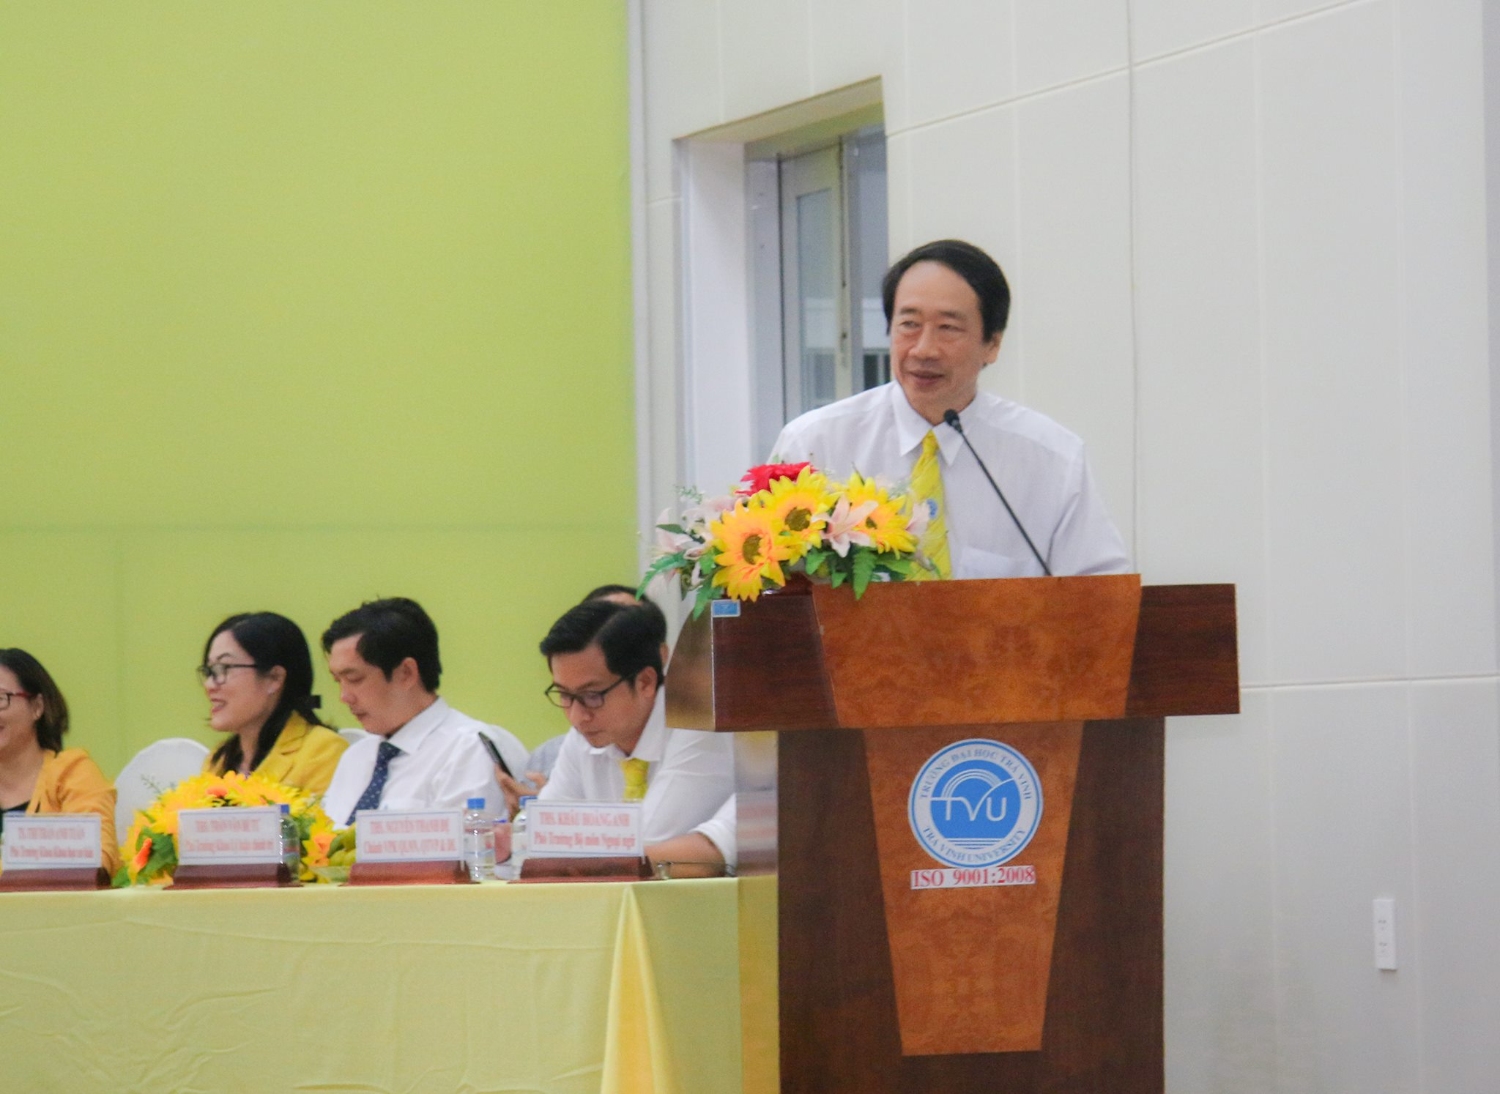  Khanh Phạm Tiet speaking into a microphone at a podium.